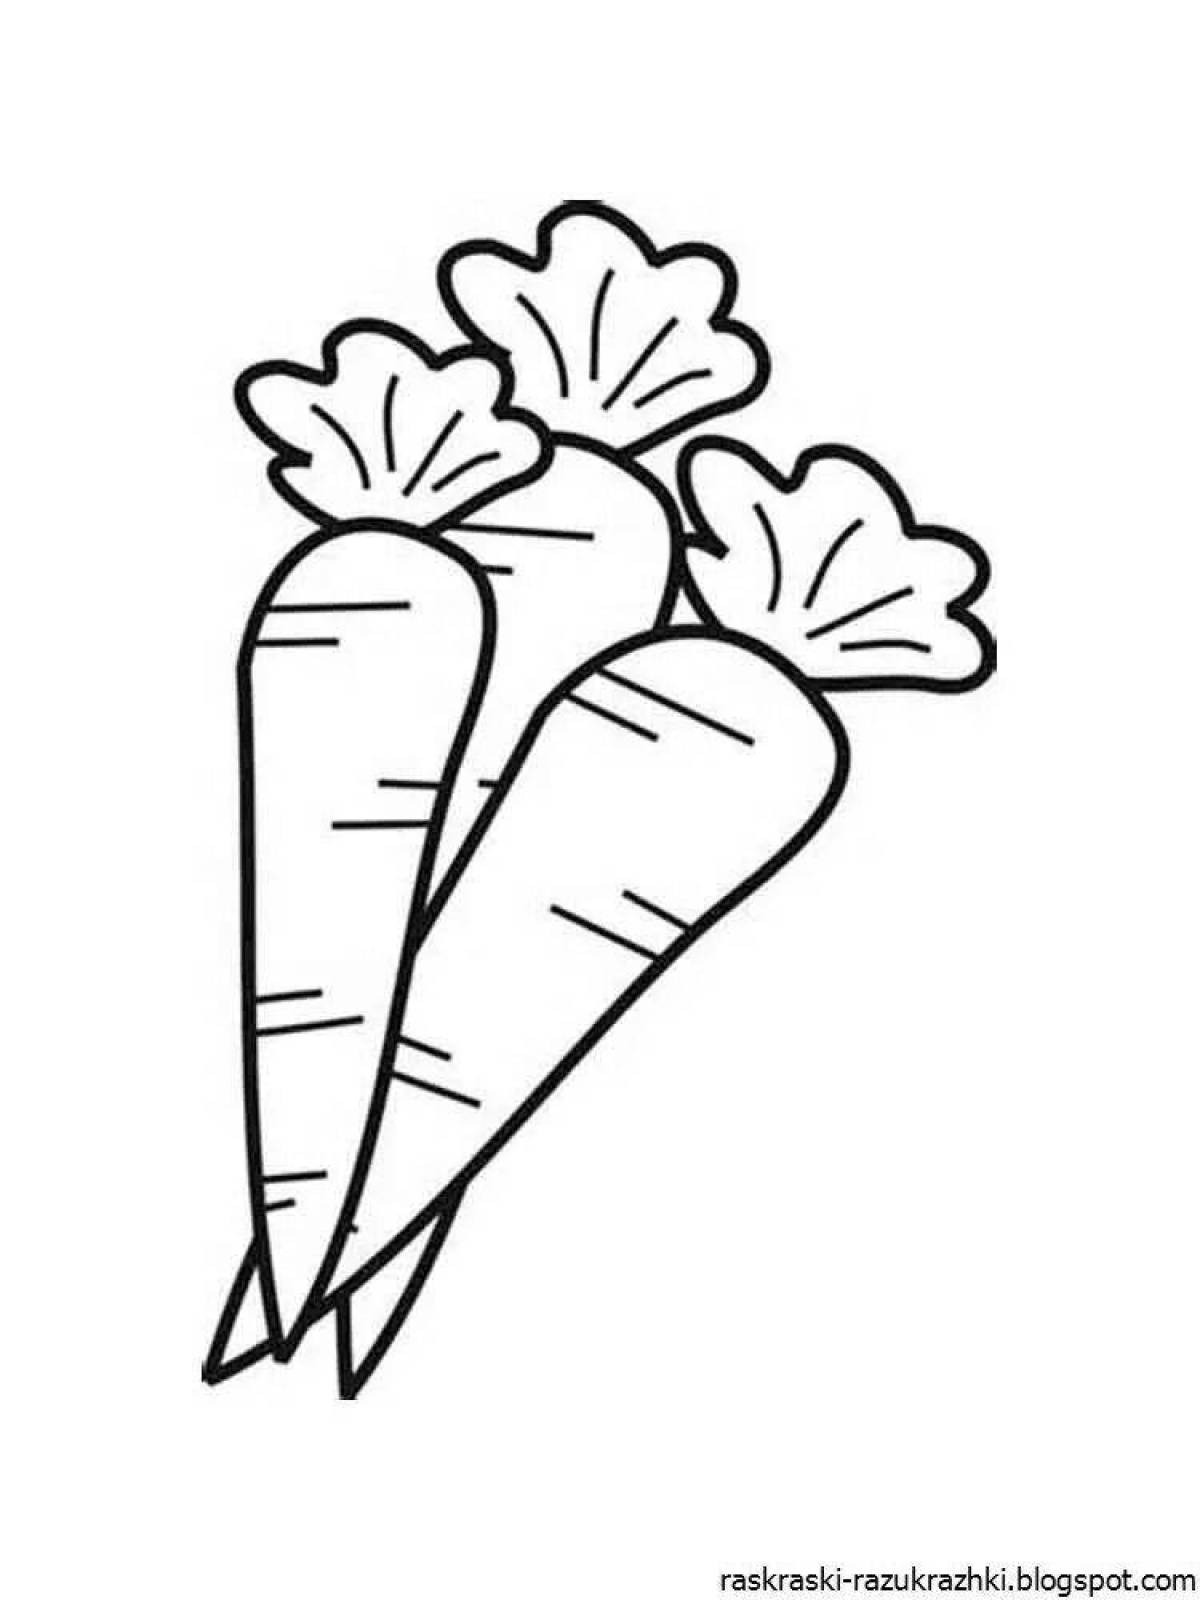 Colorful carrot coloring book for 3-4 year olds